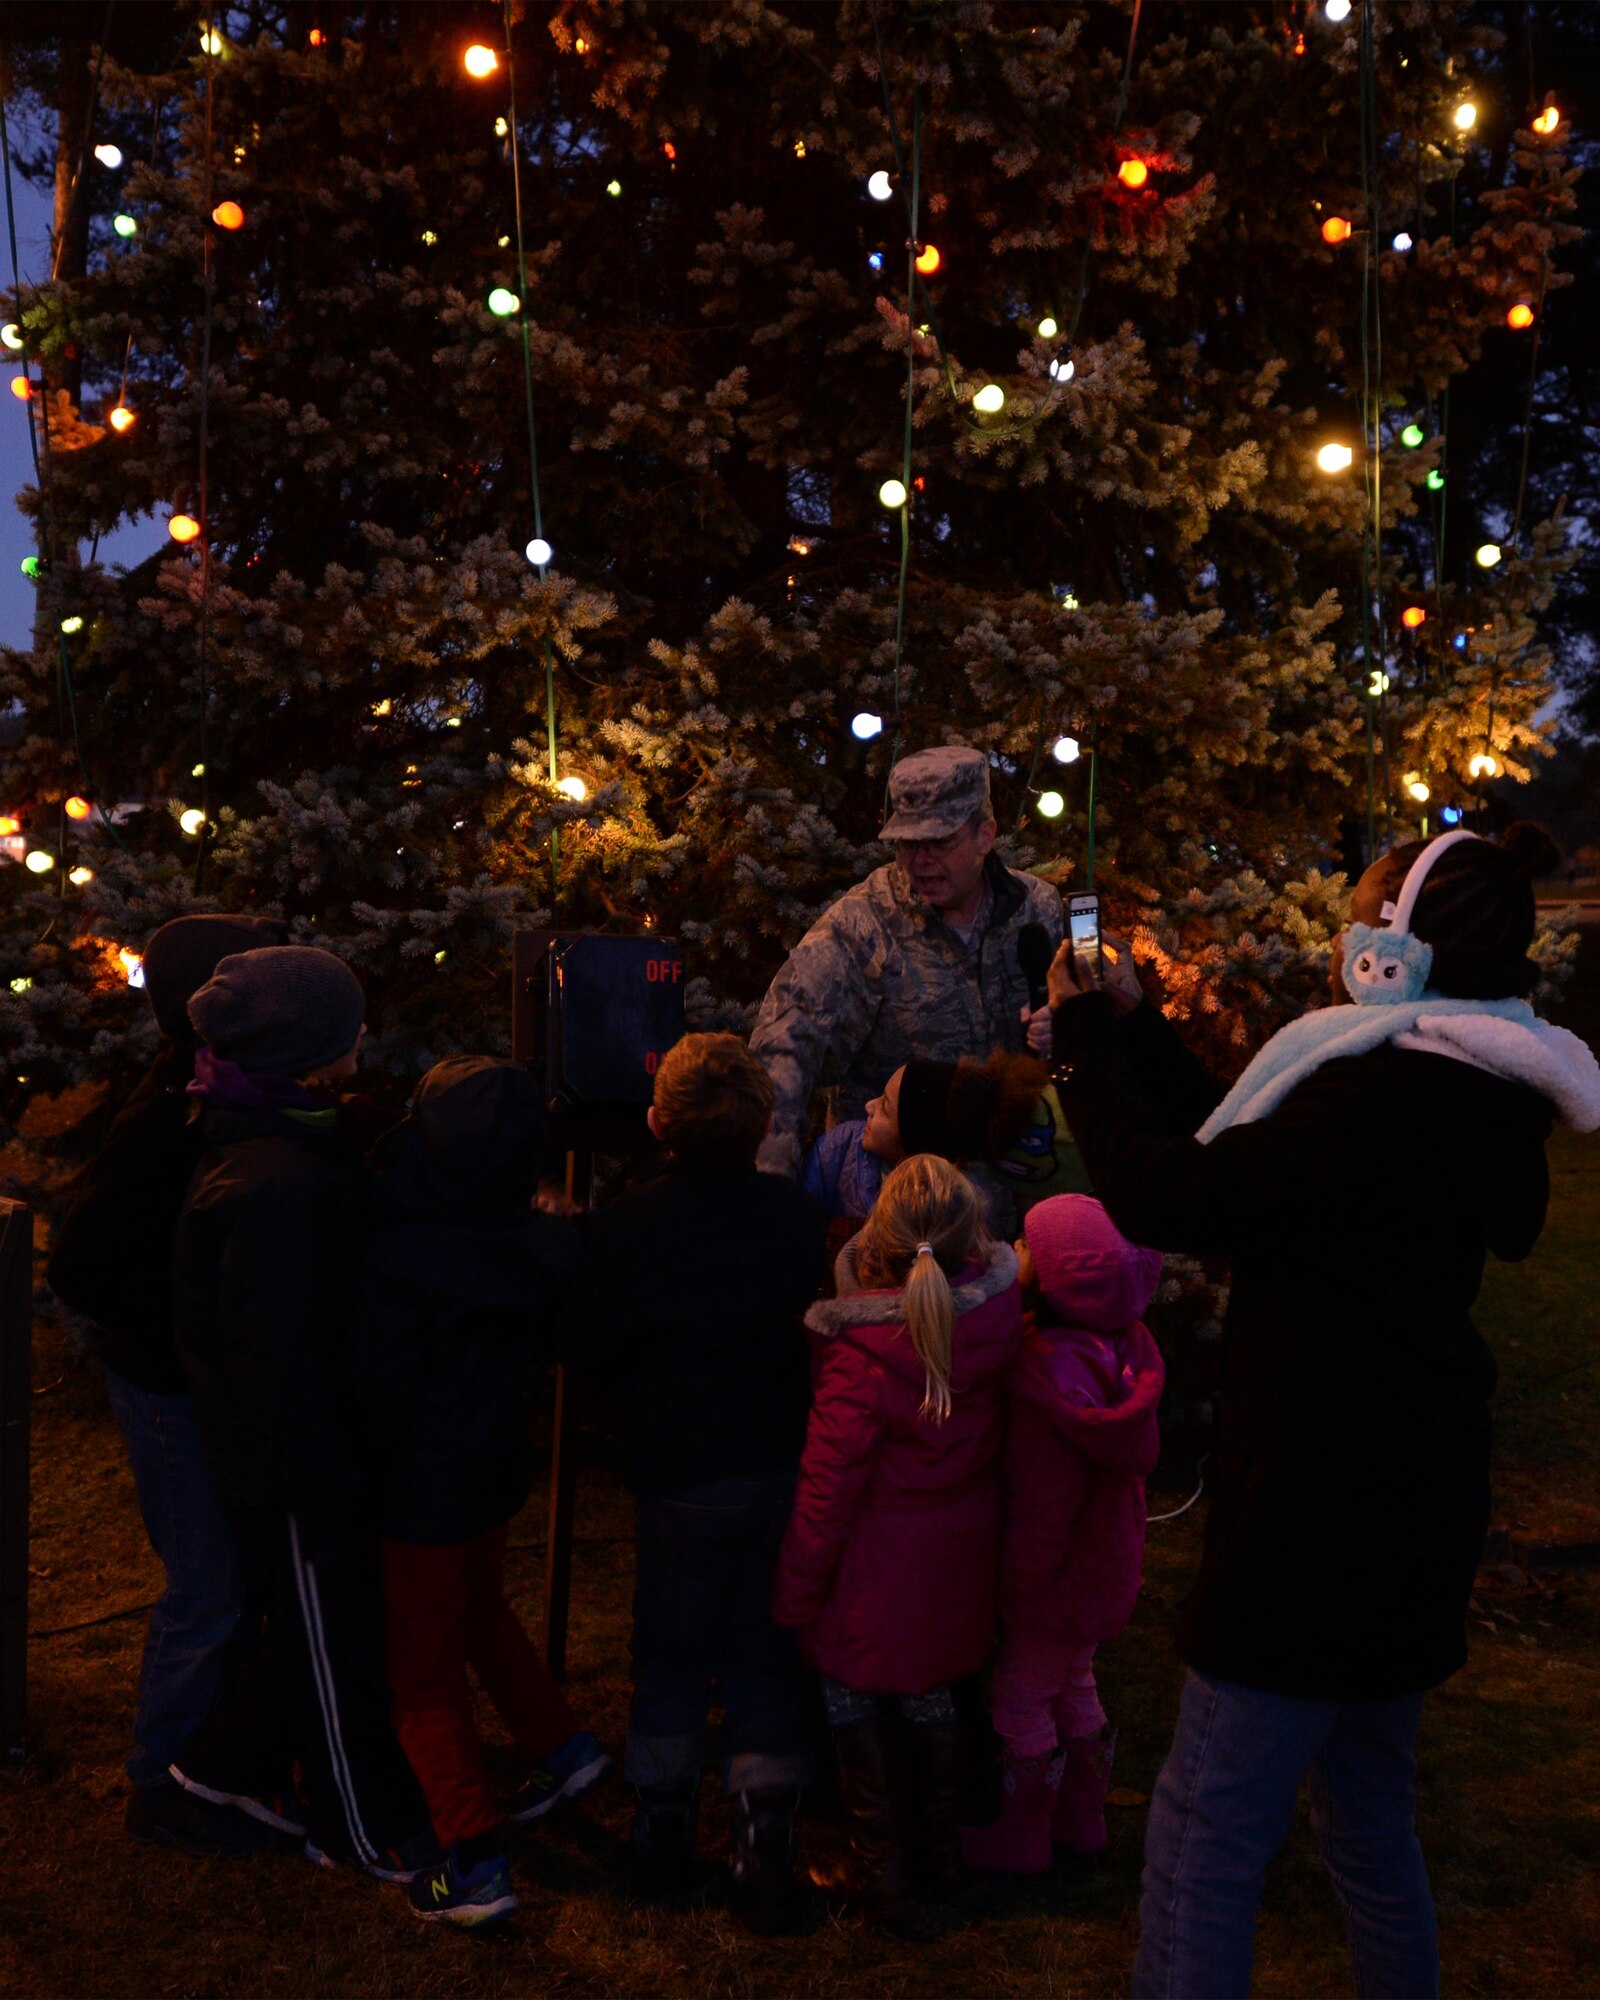 Brig. Gen. Richard G. Moore Jr., 86th Airlift Wing commander, and children from the Vogelweh community turn on the Christmas tree lights on Vogelweh Military Complex, Germany, Nov. 29, 2016. The tree lighting ceremony marked the beginning of the holiday season at Vogelweh. (U.S. Air Force photo by Senior Airman Jimmie D. Pike)